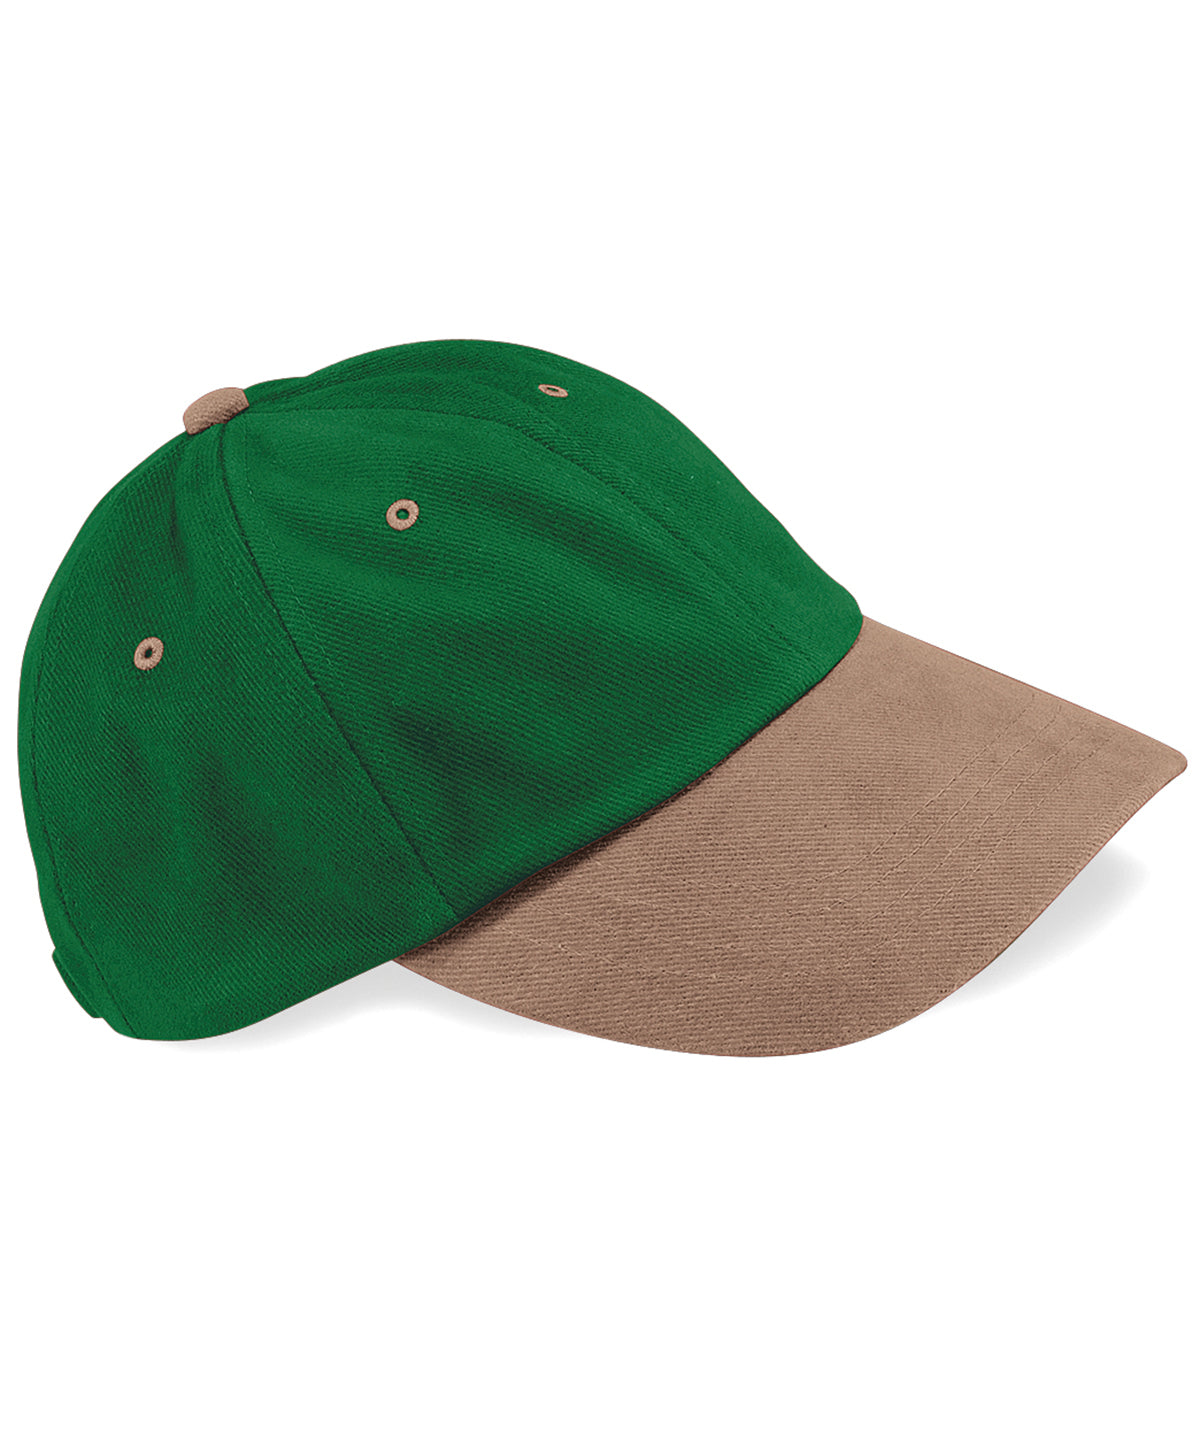 Personalised Caps - Dark Green Beechfield Low-profile heavy brushed cotton cap